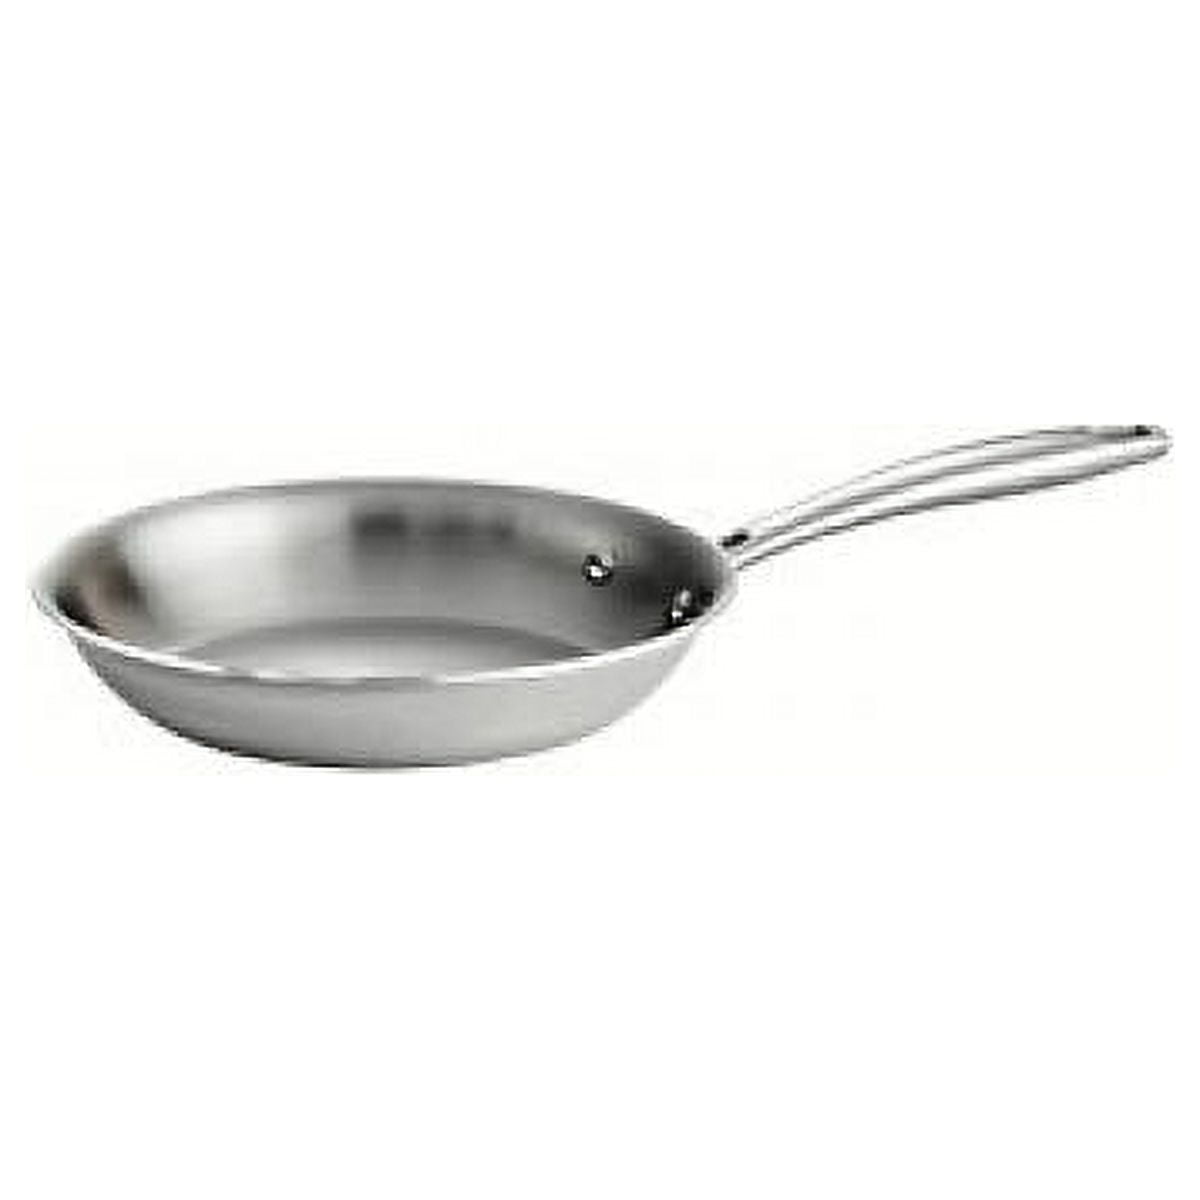 Tramontina Stainless Steel Frying Pan with Triple Bottom Lid Handle and Handle 28 cm 4.8 L 62500280